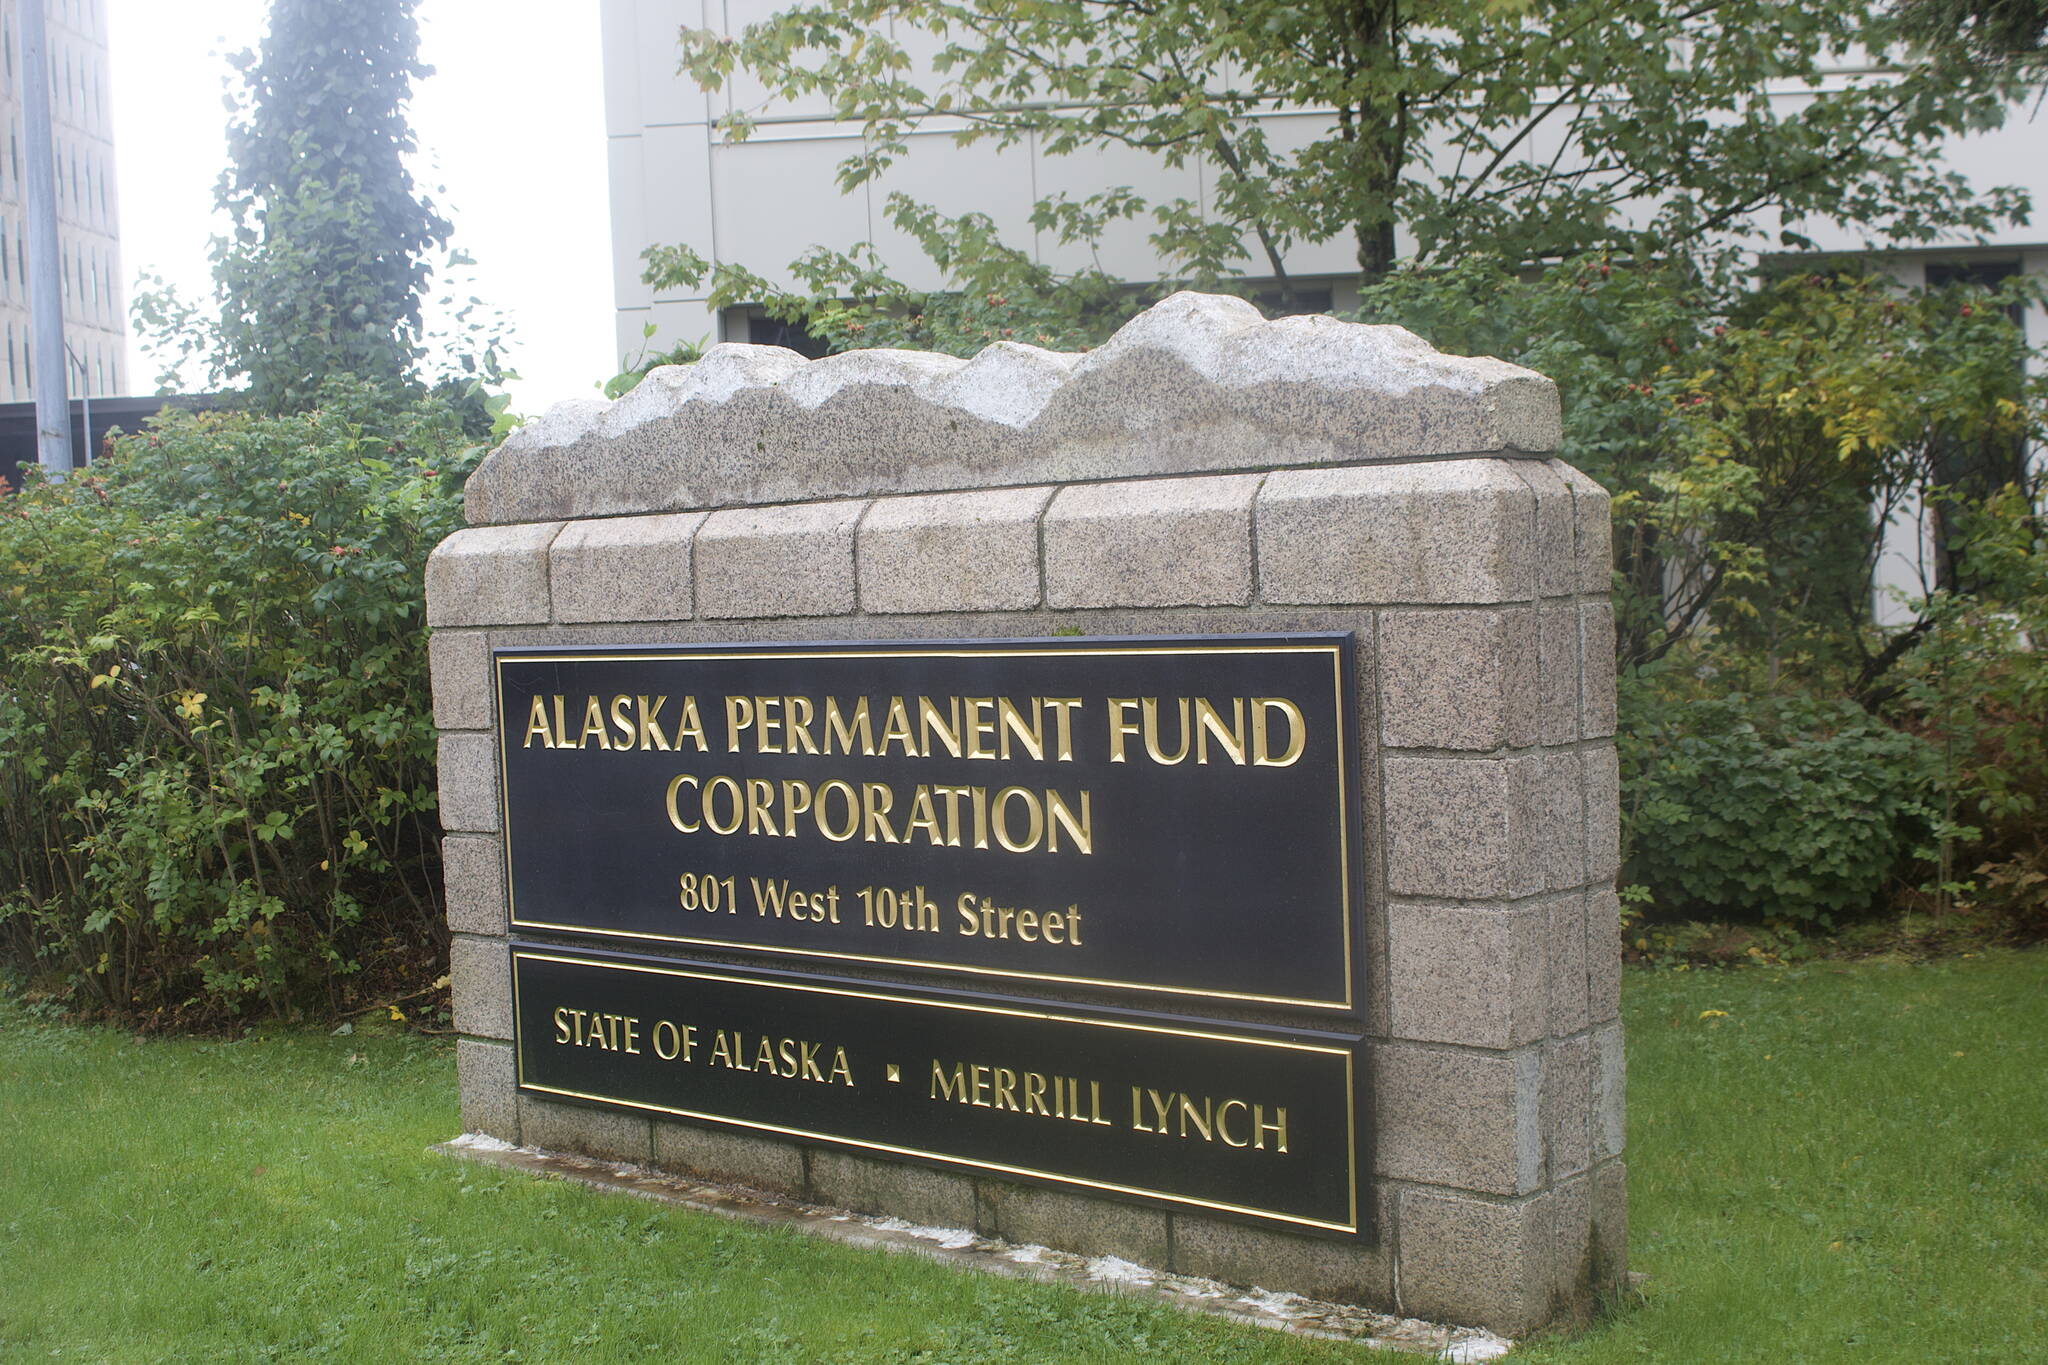 The Alaska Permanent Fund Corp. building in Juneau is scheduled to be the site where the board of trustees will select a new executive director on Monday, following the investigation into the firing of former CEO Angela Rodell last December being presented to state lawmakers on Wednesday. (Mark Sabbatini / Juneau Empire)